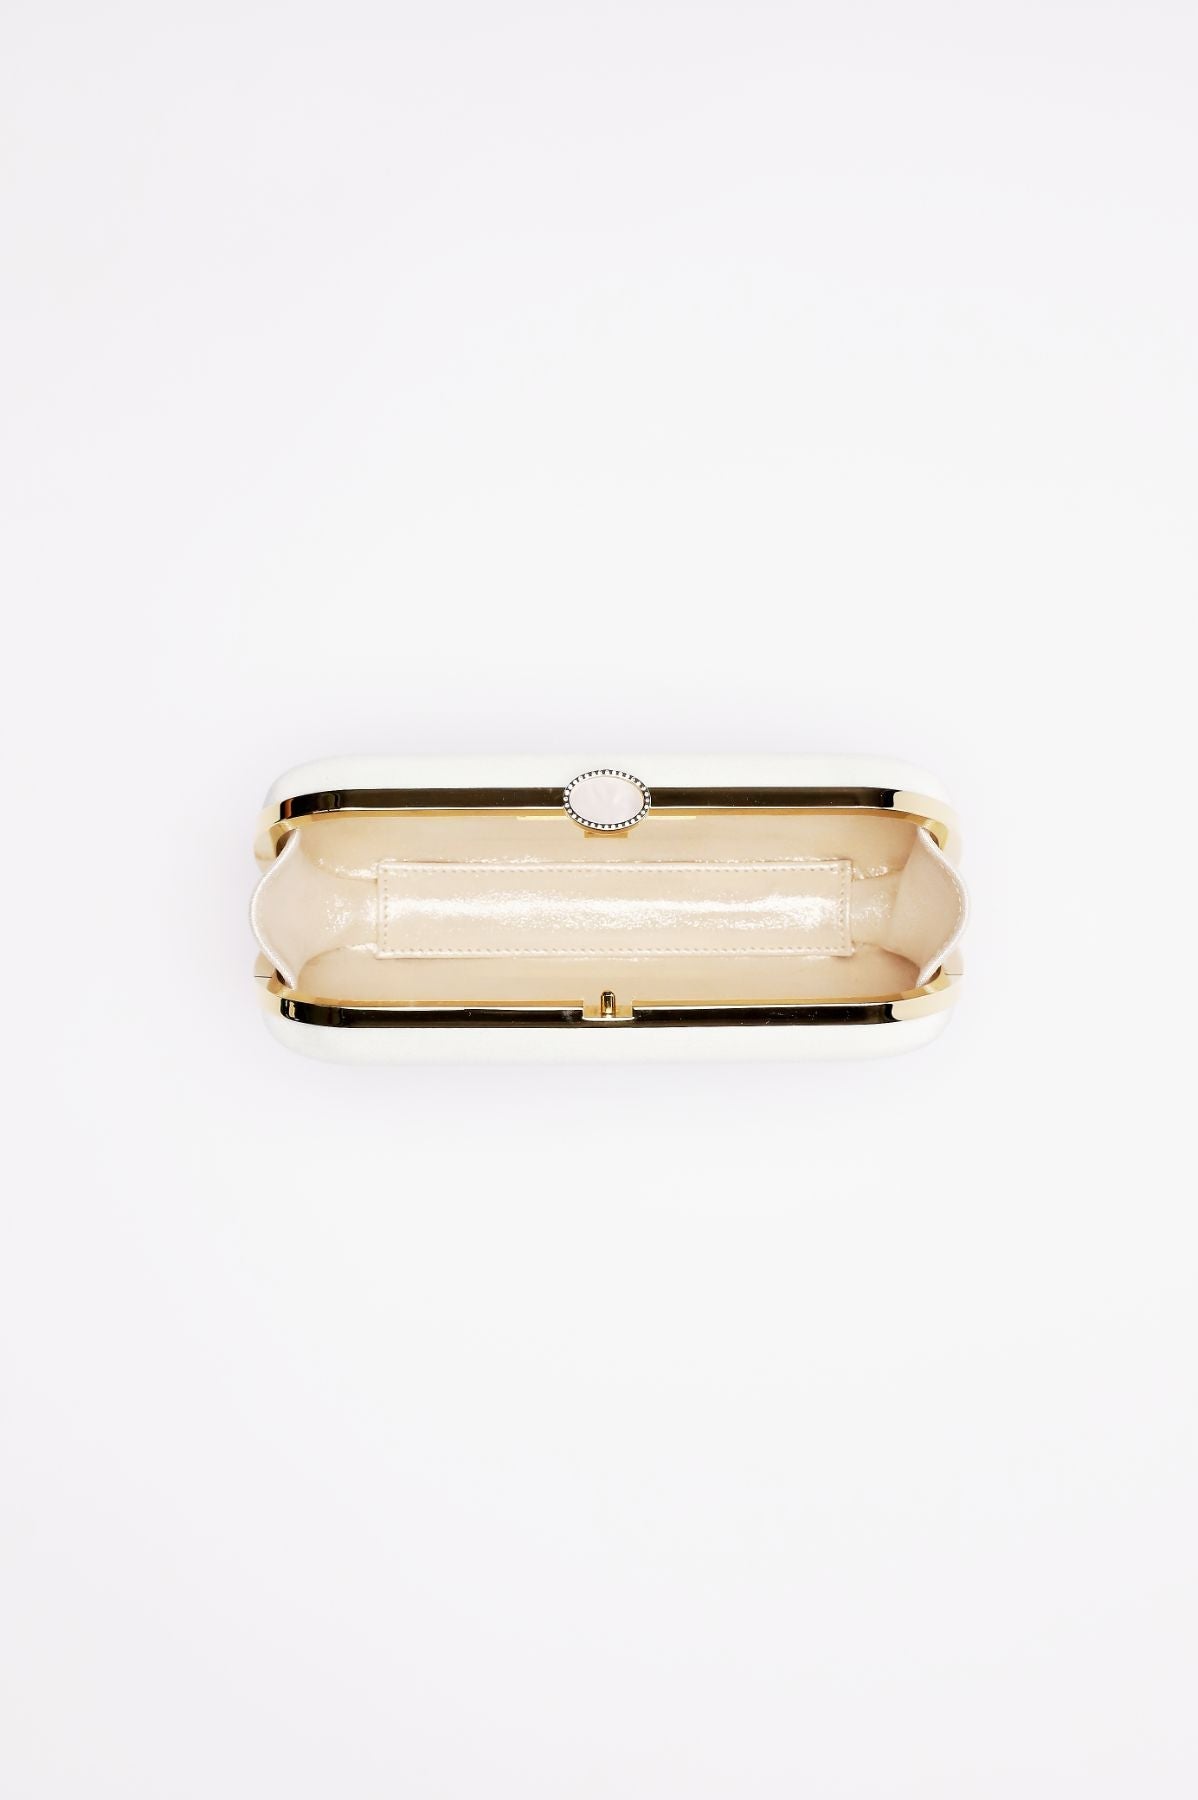 An open, empty Bella Clutch Ivory Petite made of Duchess Satin on a white background by The Bella Rosa Collection.